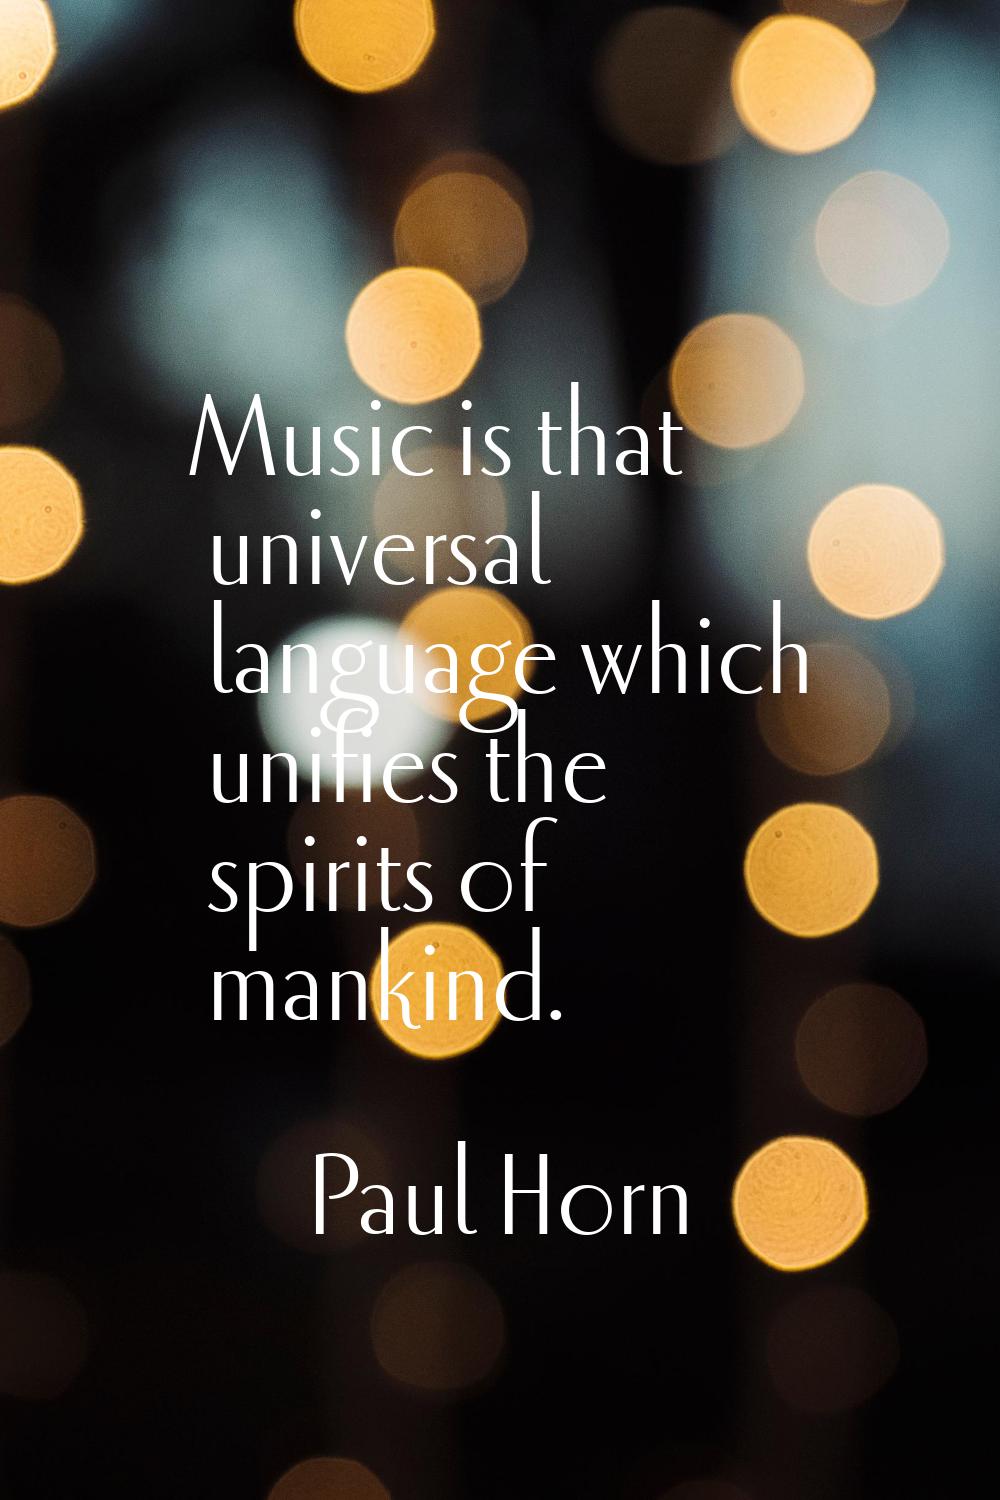 Music is that universal language which unifies the spirits of mankind.